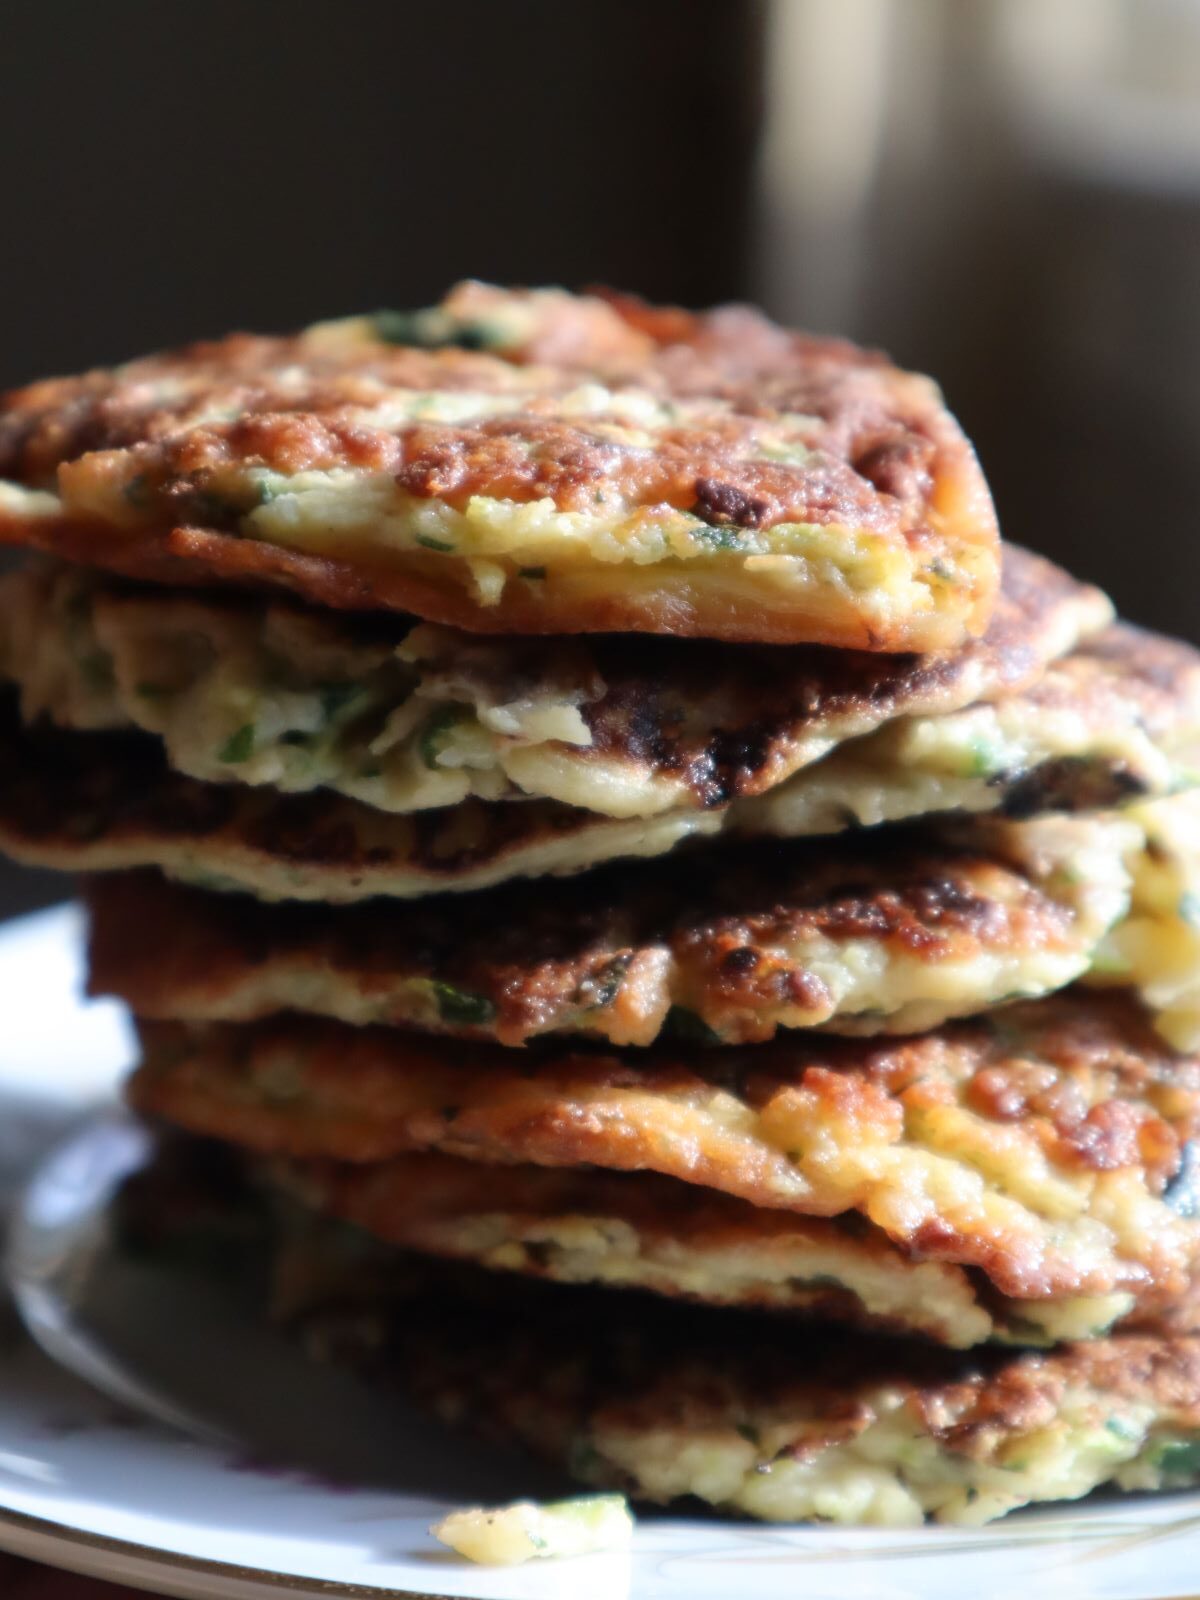 Savory Zucchini fritters/pancakes stacked on a white plate